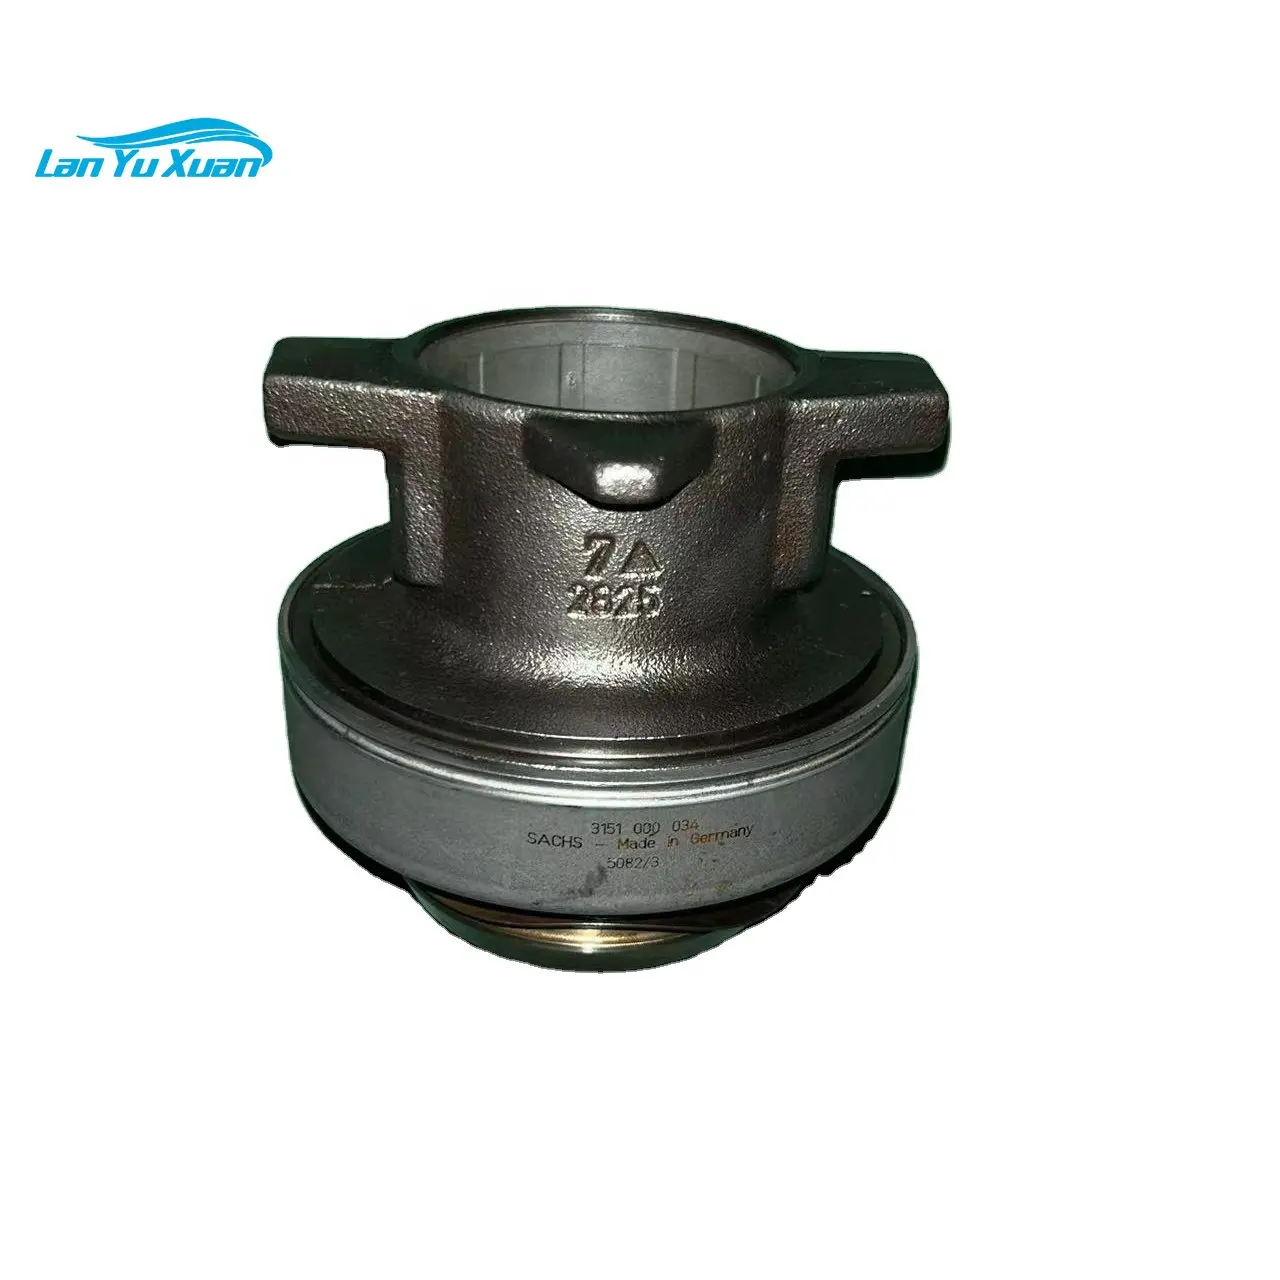 SACHS 3151000034 81.30000-6587 81.30000-6600 81.30550-0063 1250710 1303975 1362752 Clutch Release Bearing competitive price 22000 5p8 026 22000 5p8 016 22000 5p8 036 hydraulic clutch release bearing for honda